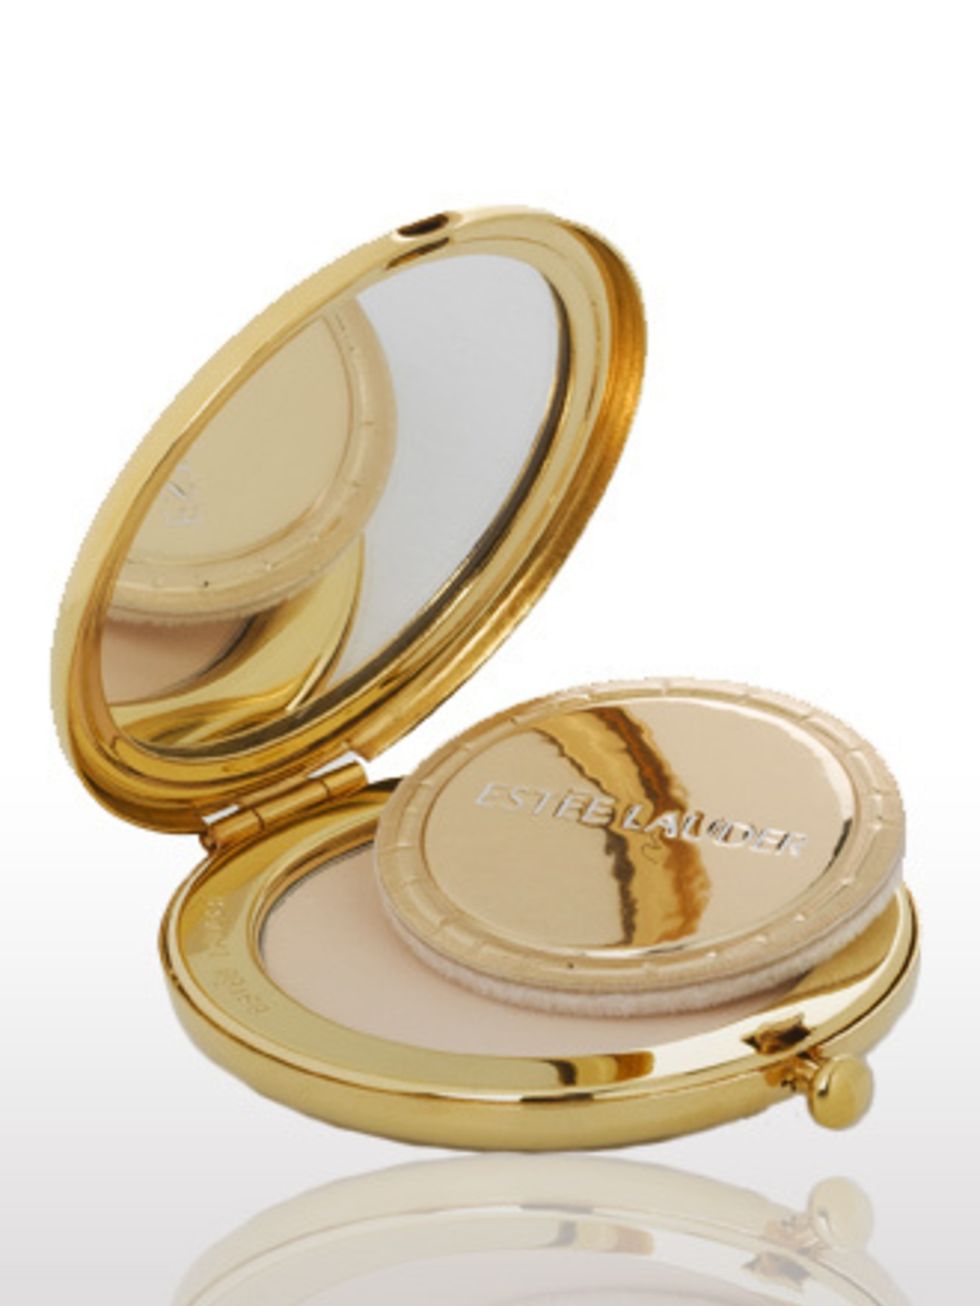 <p>Compact, £29.36 by Estee Lauder.</p><p>This refillable gold compact from Estee Lauder is chic and timeless.</p>